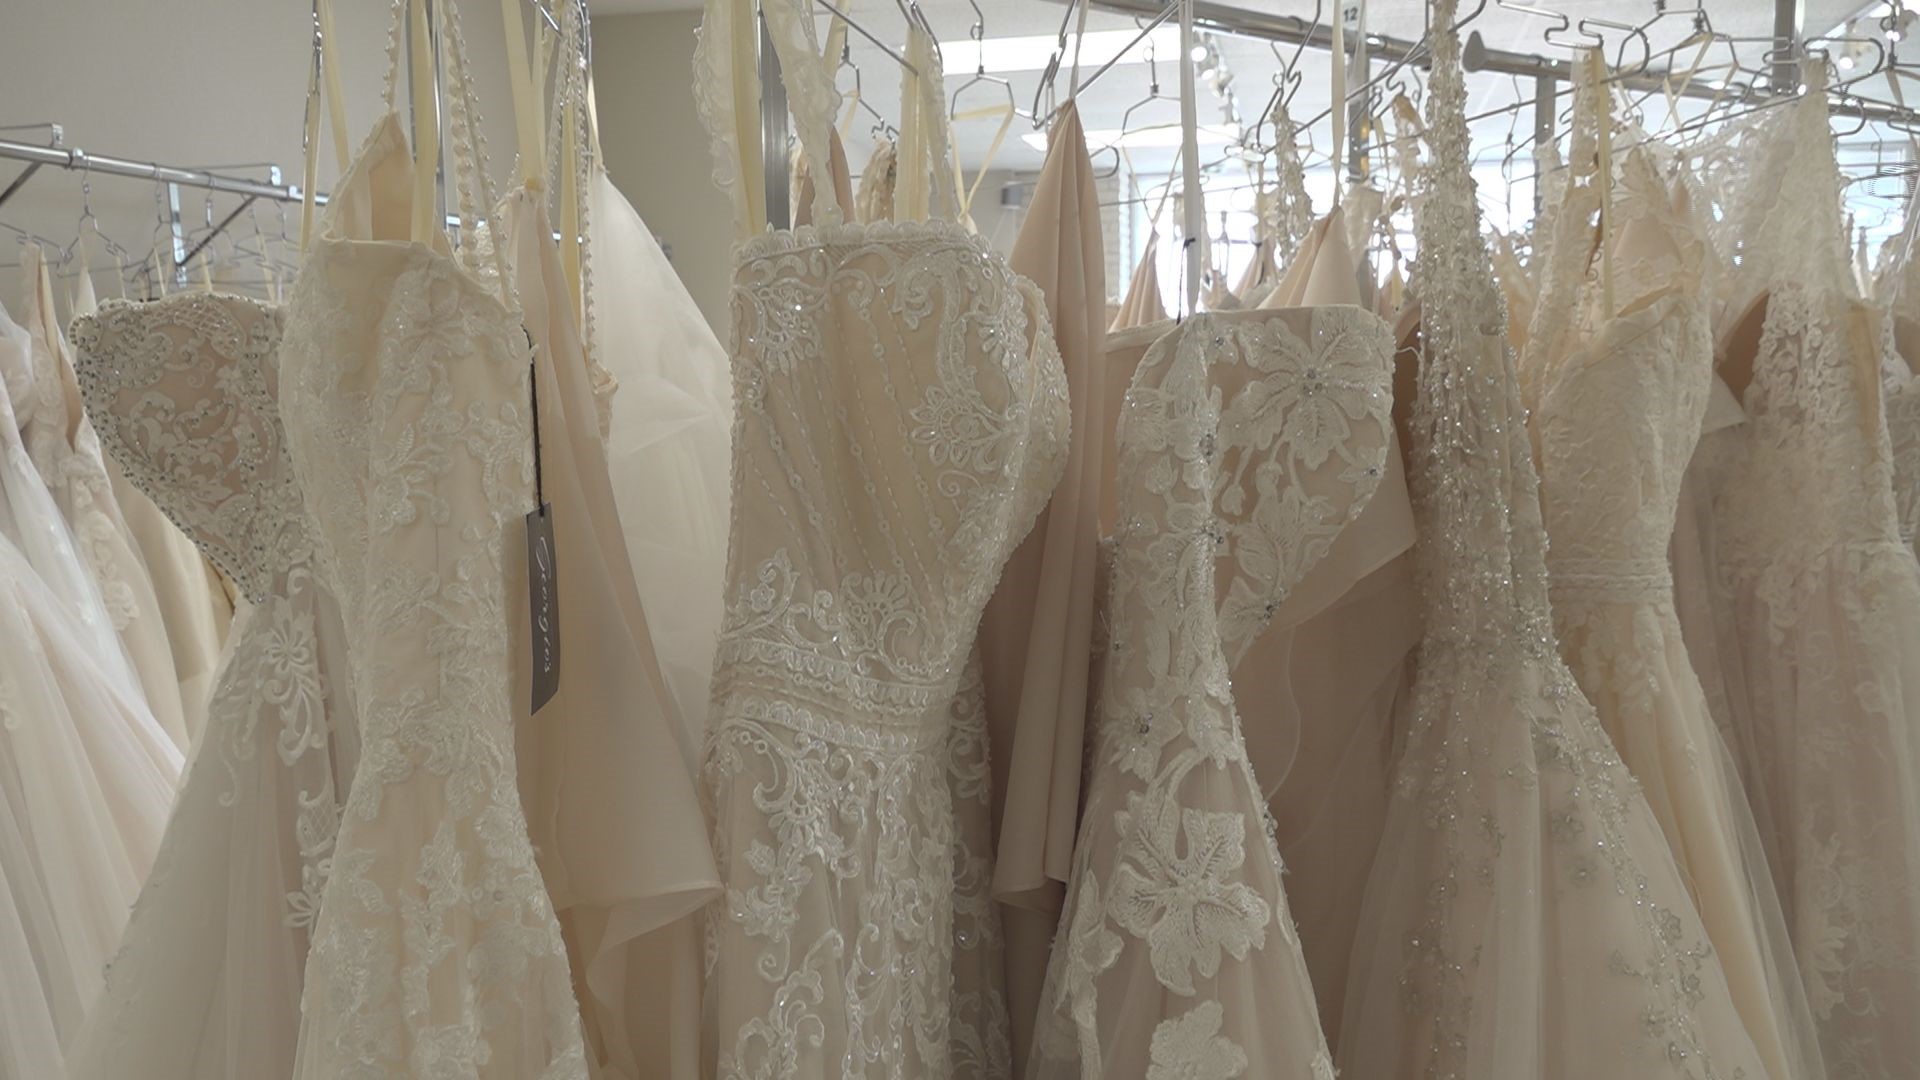 Brides Across America and Georgio's Bridal in Waco joined forces to provide free wedding dresses to the frontline healthcare workers of the COVID-19 pandemic.